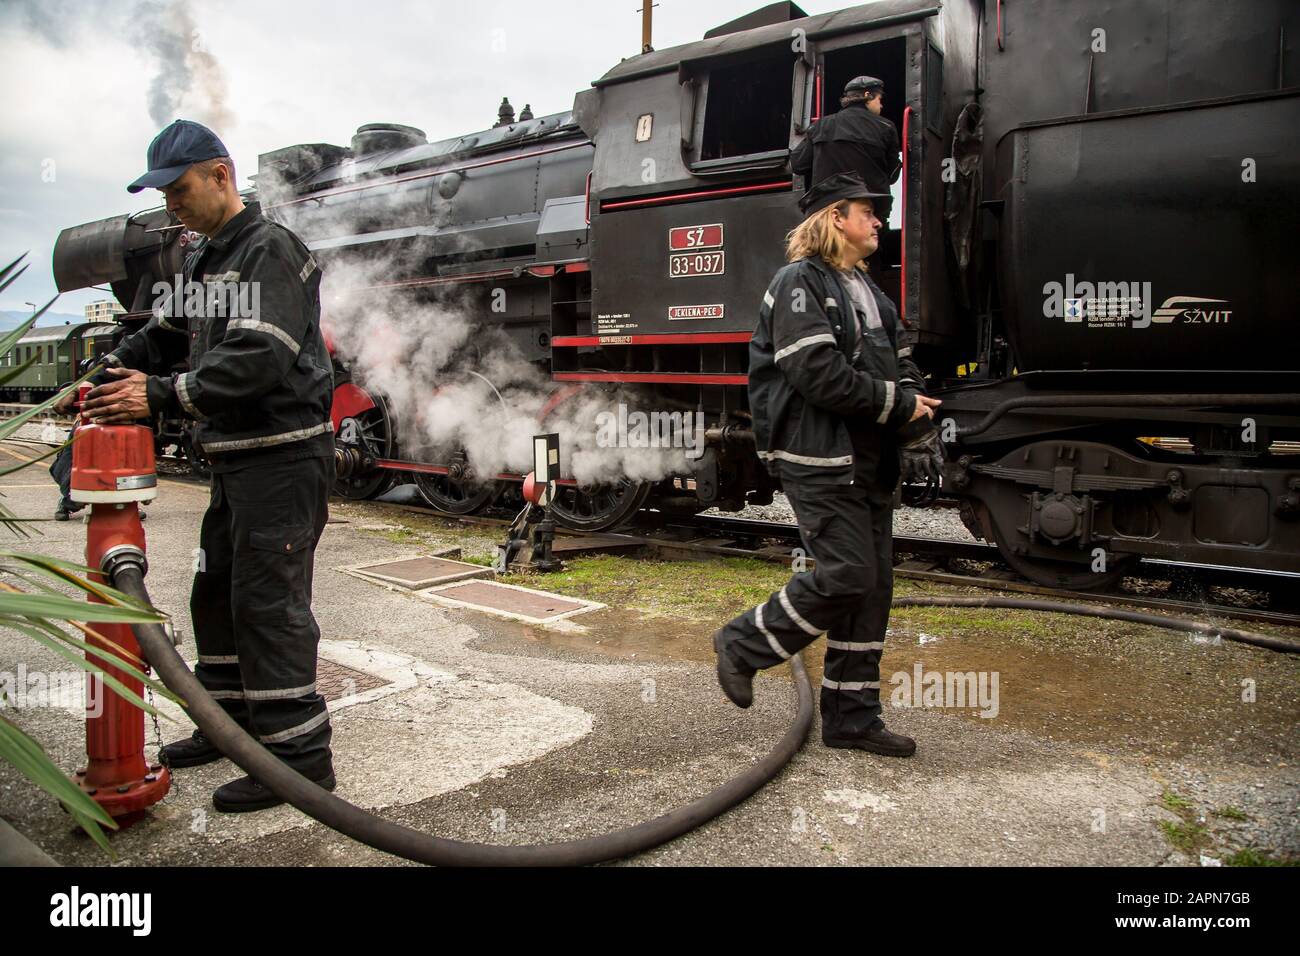 Nova Gorica, Slovenia, November 4, 2017: Railway personnel tends to a 1944 Henschel & Son German steam engine at the Nova Gorica train station. The locomotive is one of two that pull an old museum train on the Bohinj railway line (Transalpina) built from 1900 to 1906 as the shortest connection of the Austro-Hungarian Empire with the Adriatic Sea in Trieste (Italy). Stock Photo